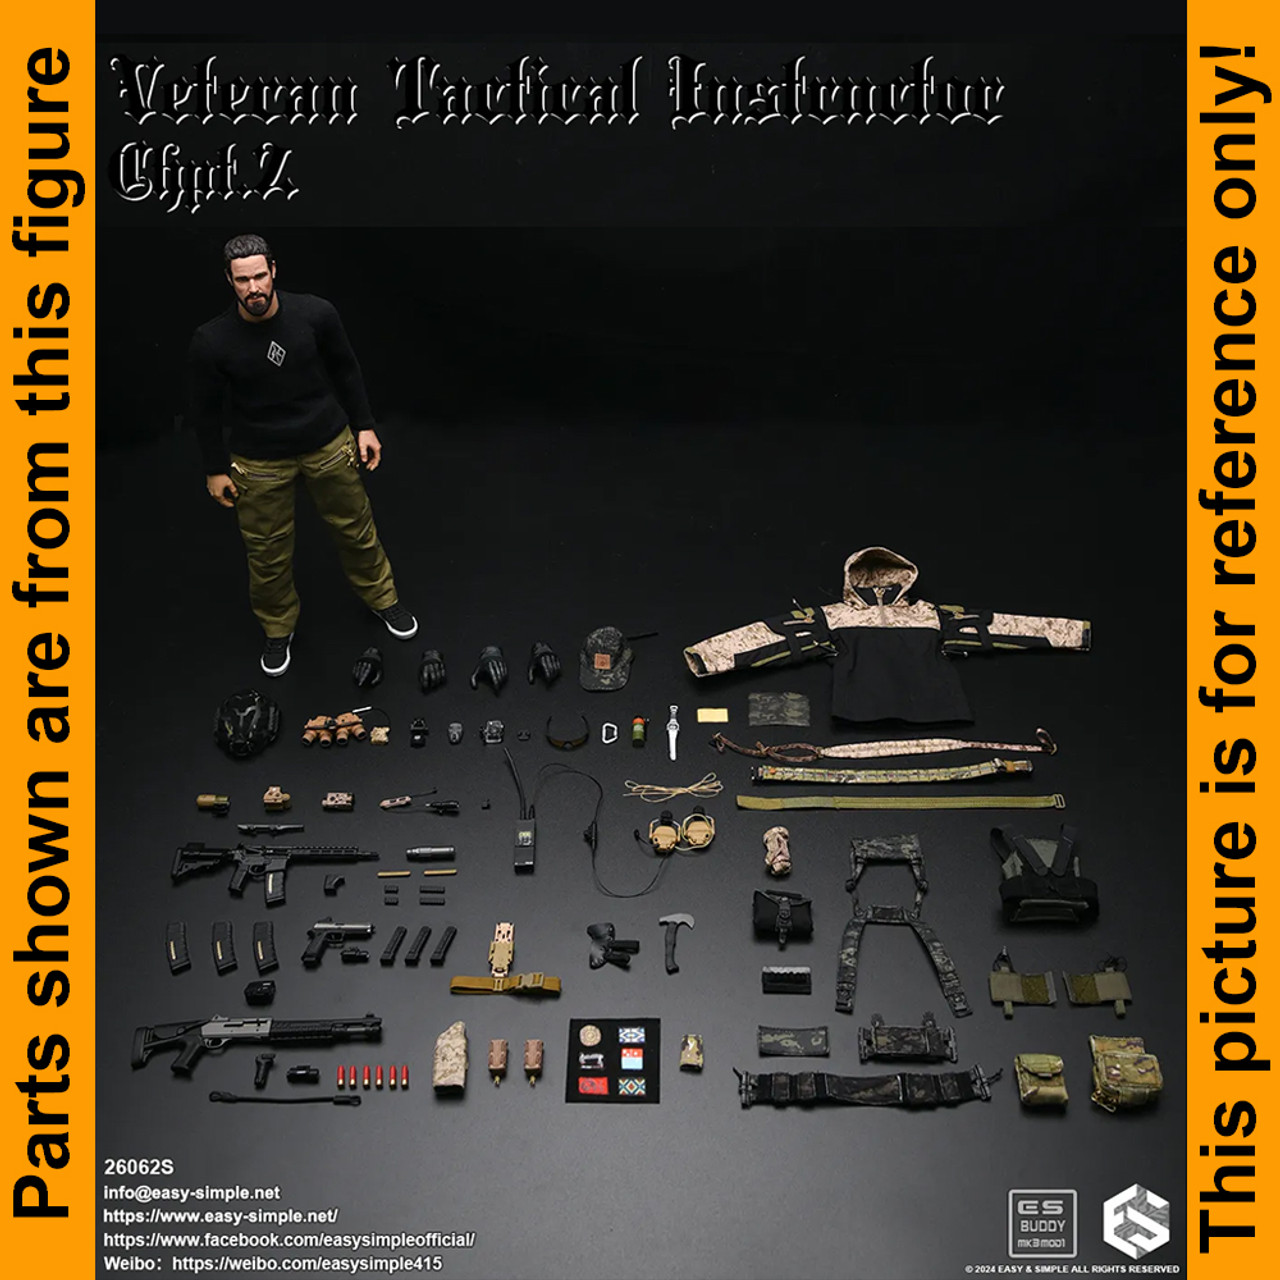 S Tactical Instructor Chpt 2 - Body Armor Vest #1 - 1/6 Scale